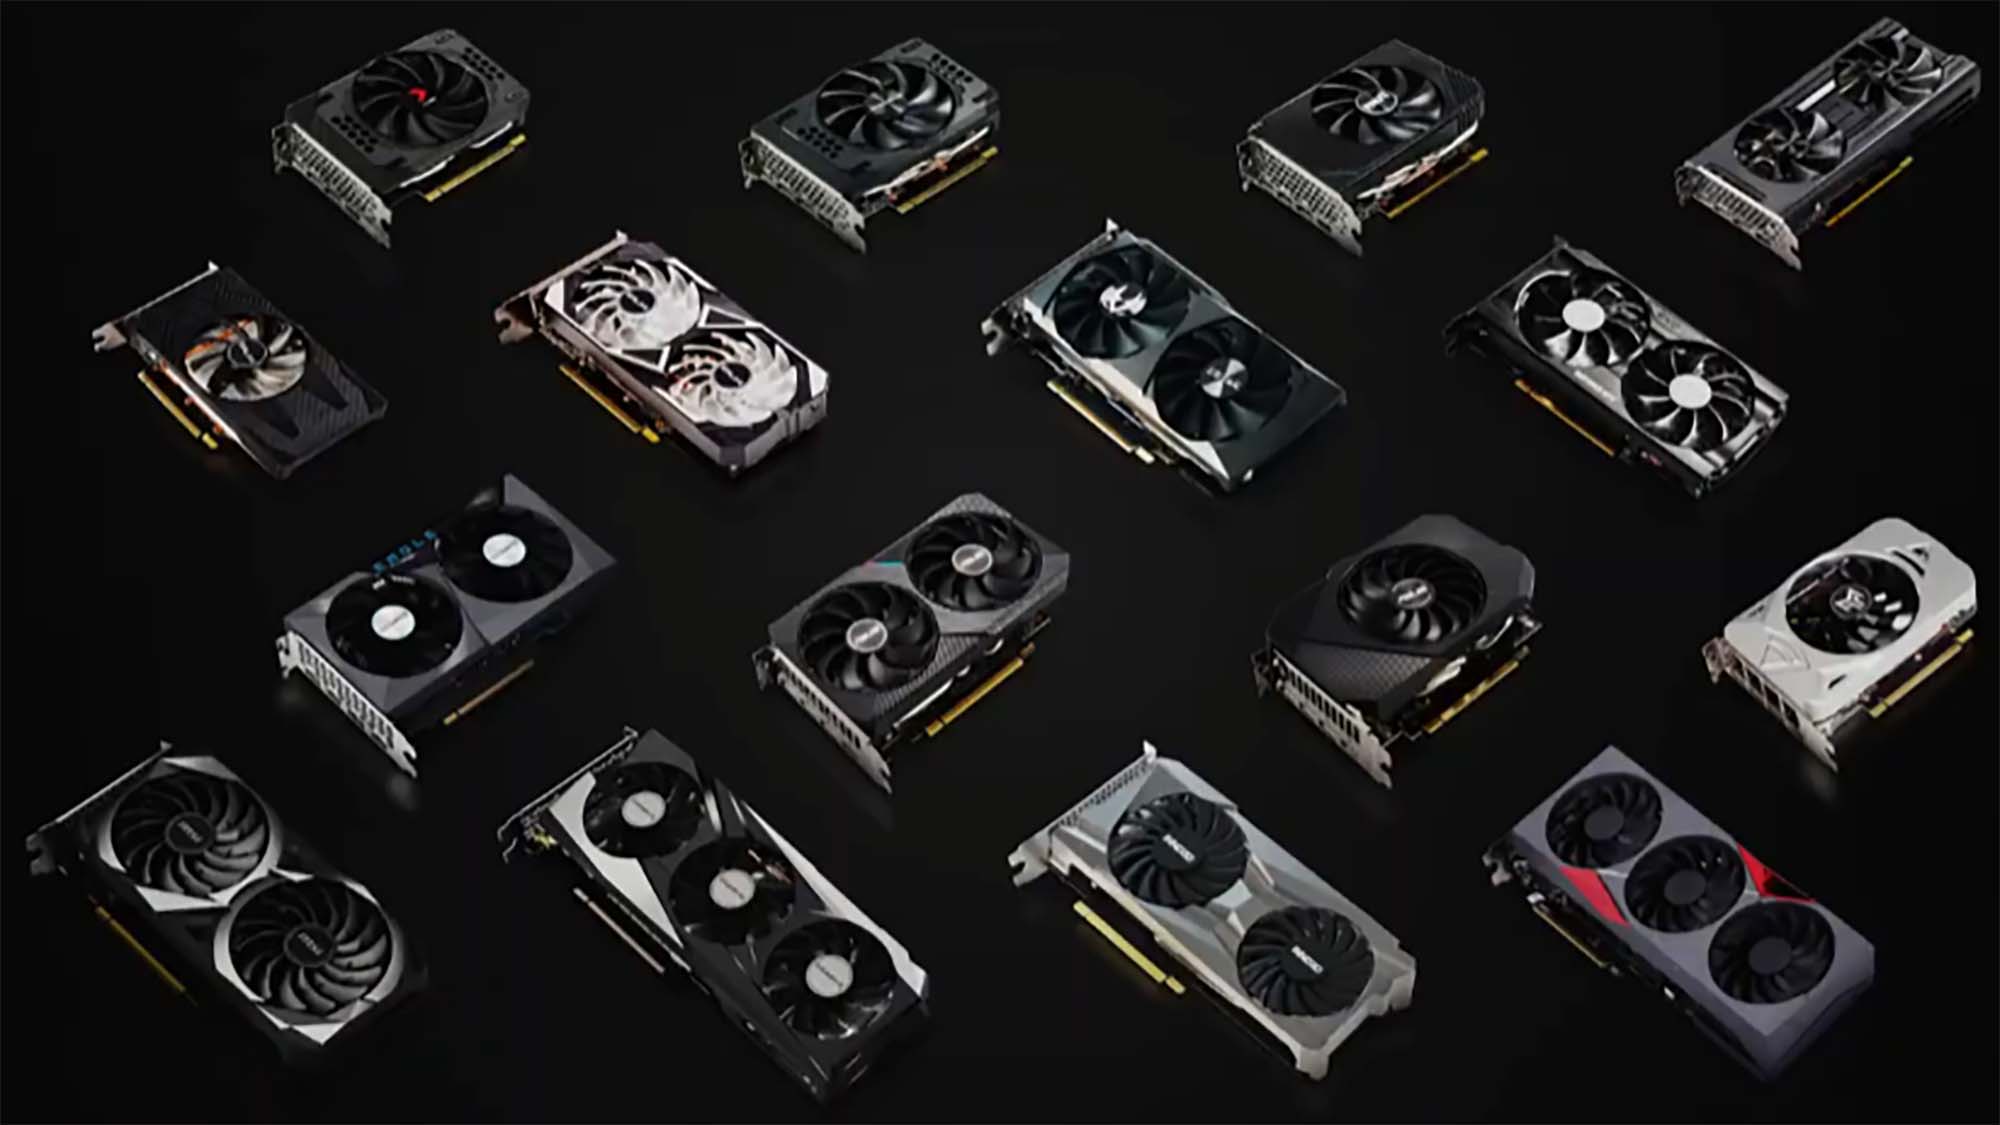 The Nvidia Rtx 3090 Ti Is The Gpu We All Want – But It’s The Rtx 3050 That We Need